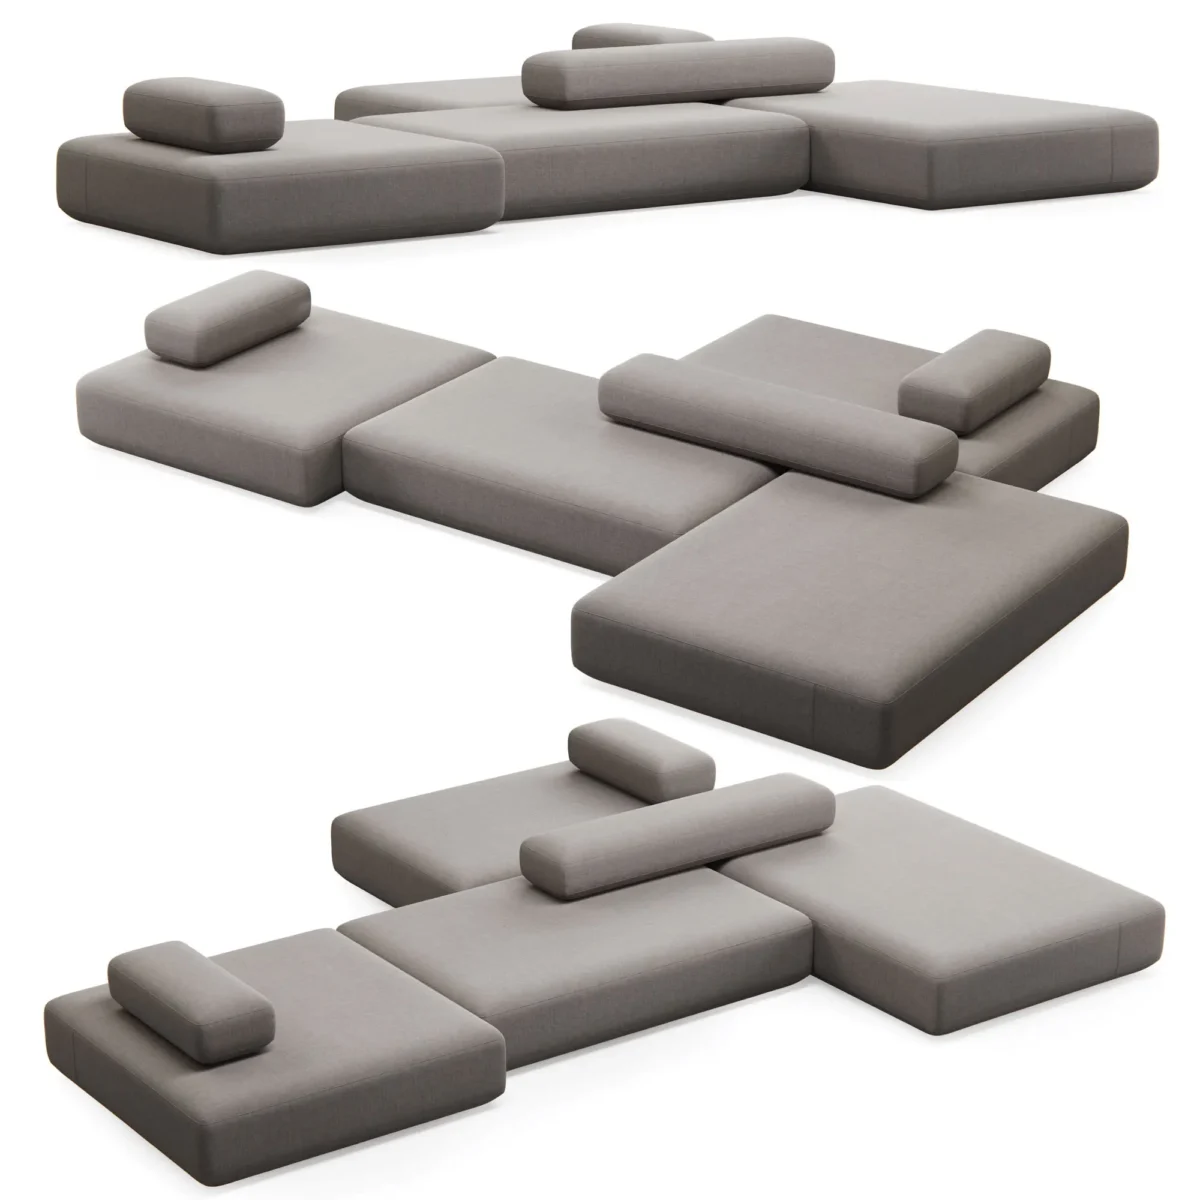 Aatom_MOVE sofa 3D model for 3ds max and Corona Render